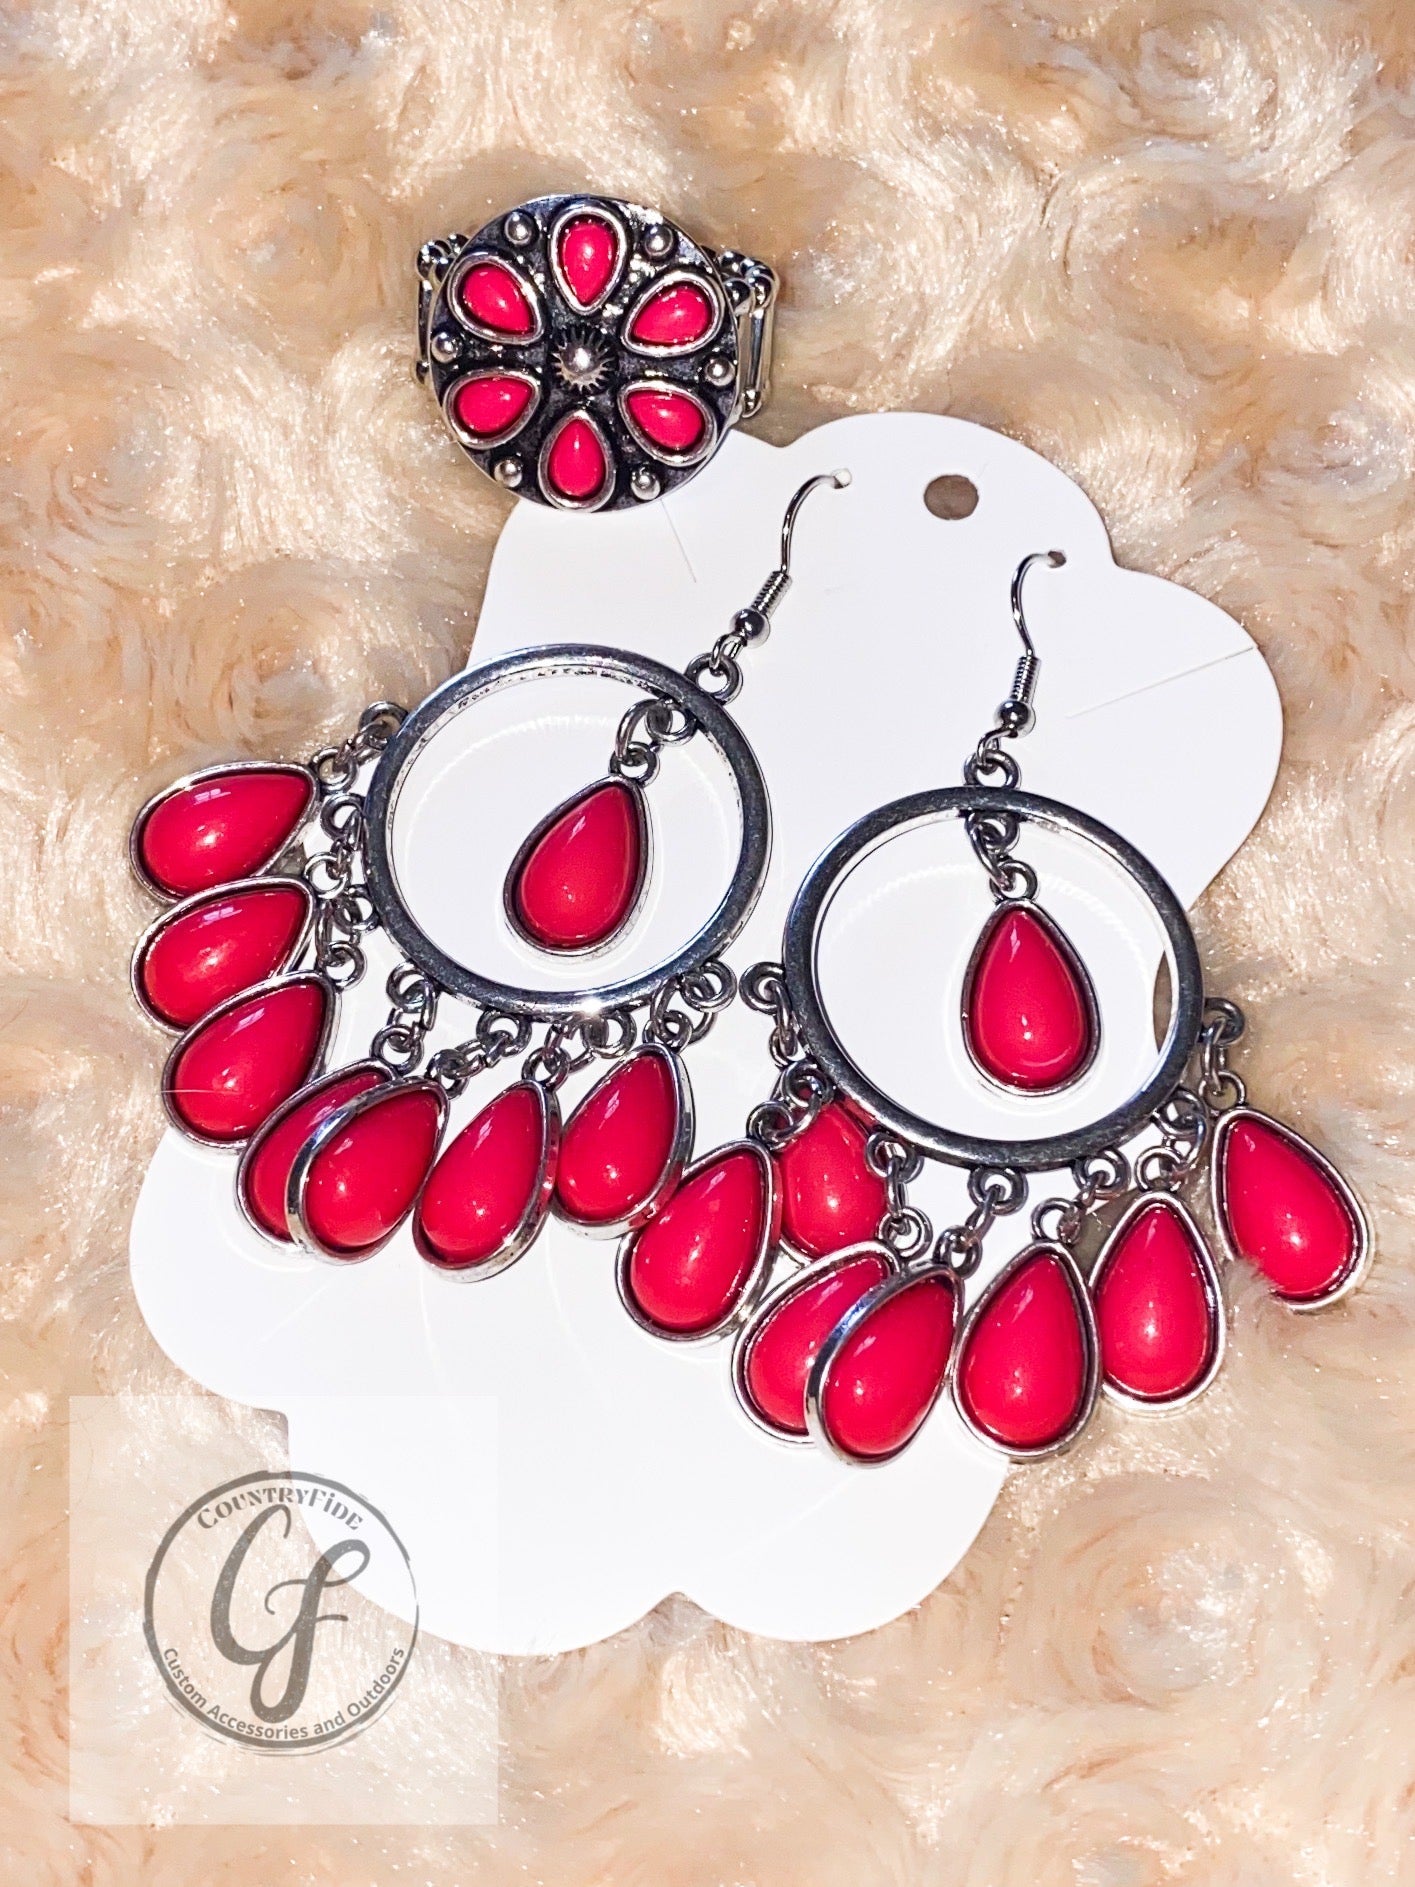 HOT PINK AND SILVER TEAR DROP EARRINGS - CountryFide Custom Accessories and Outdoors